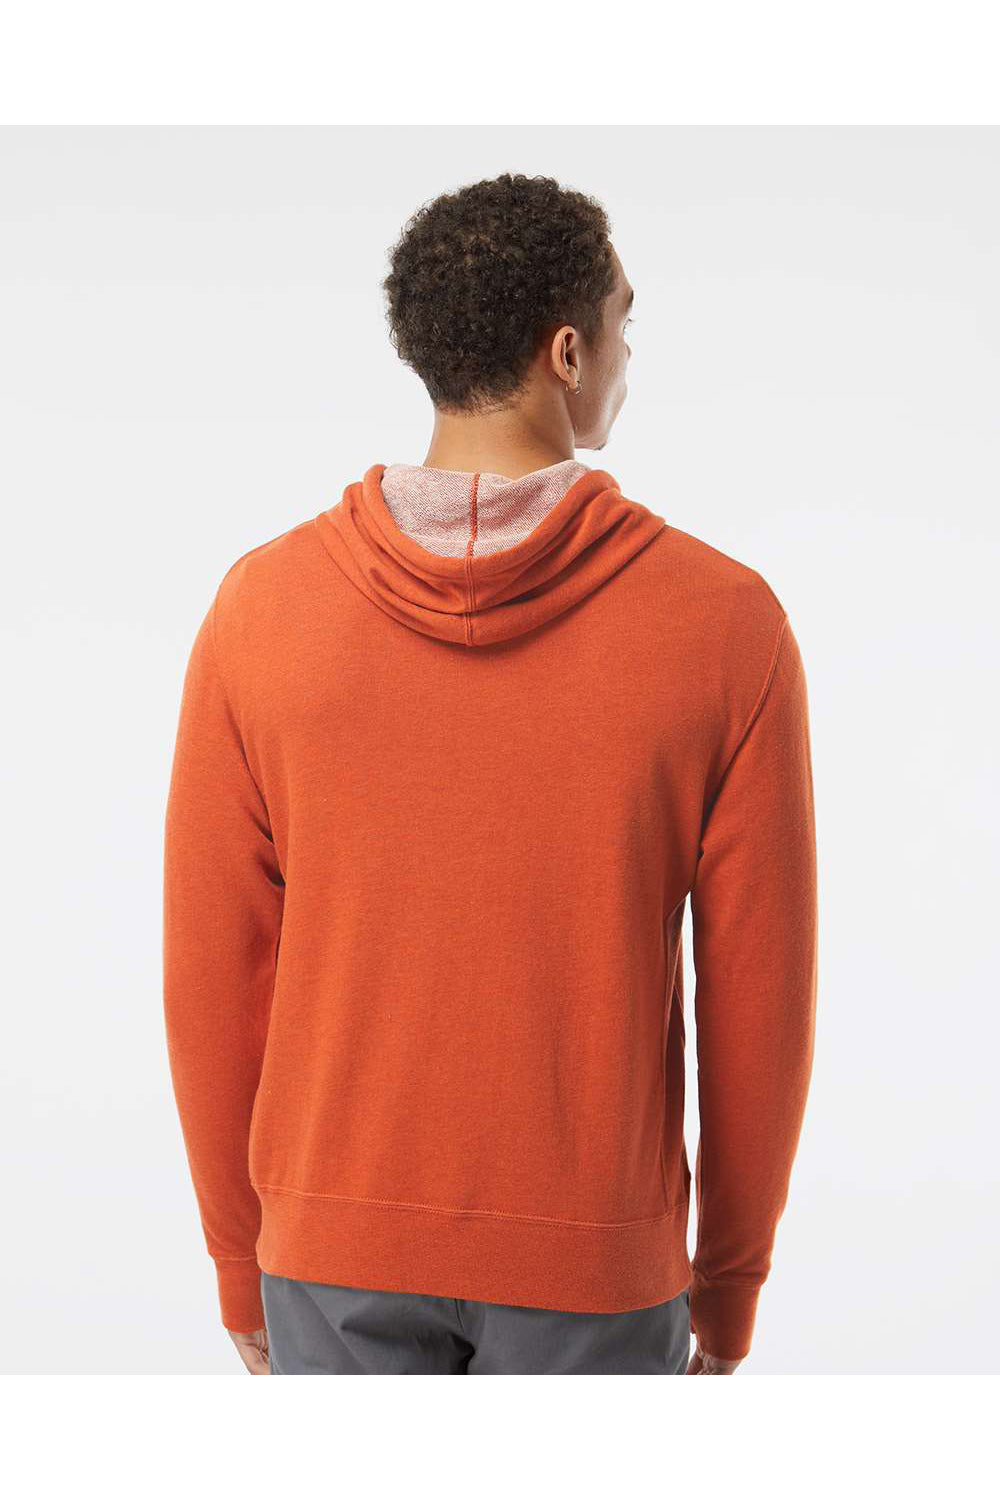 Independent Trading Co. PRM90HT Mens French Terry Hooded Sweatshirt Hoodie Heather Burnt Orange Model Back